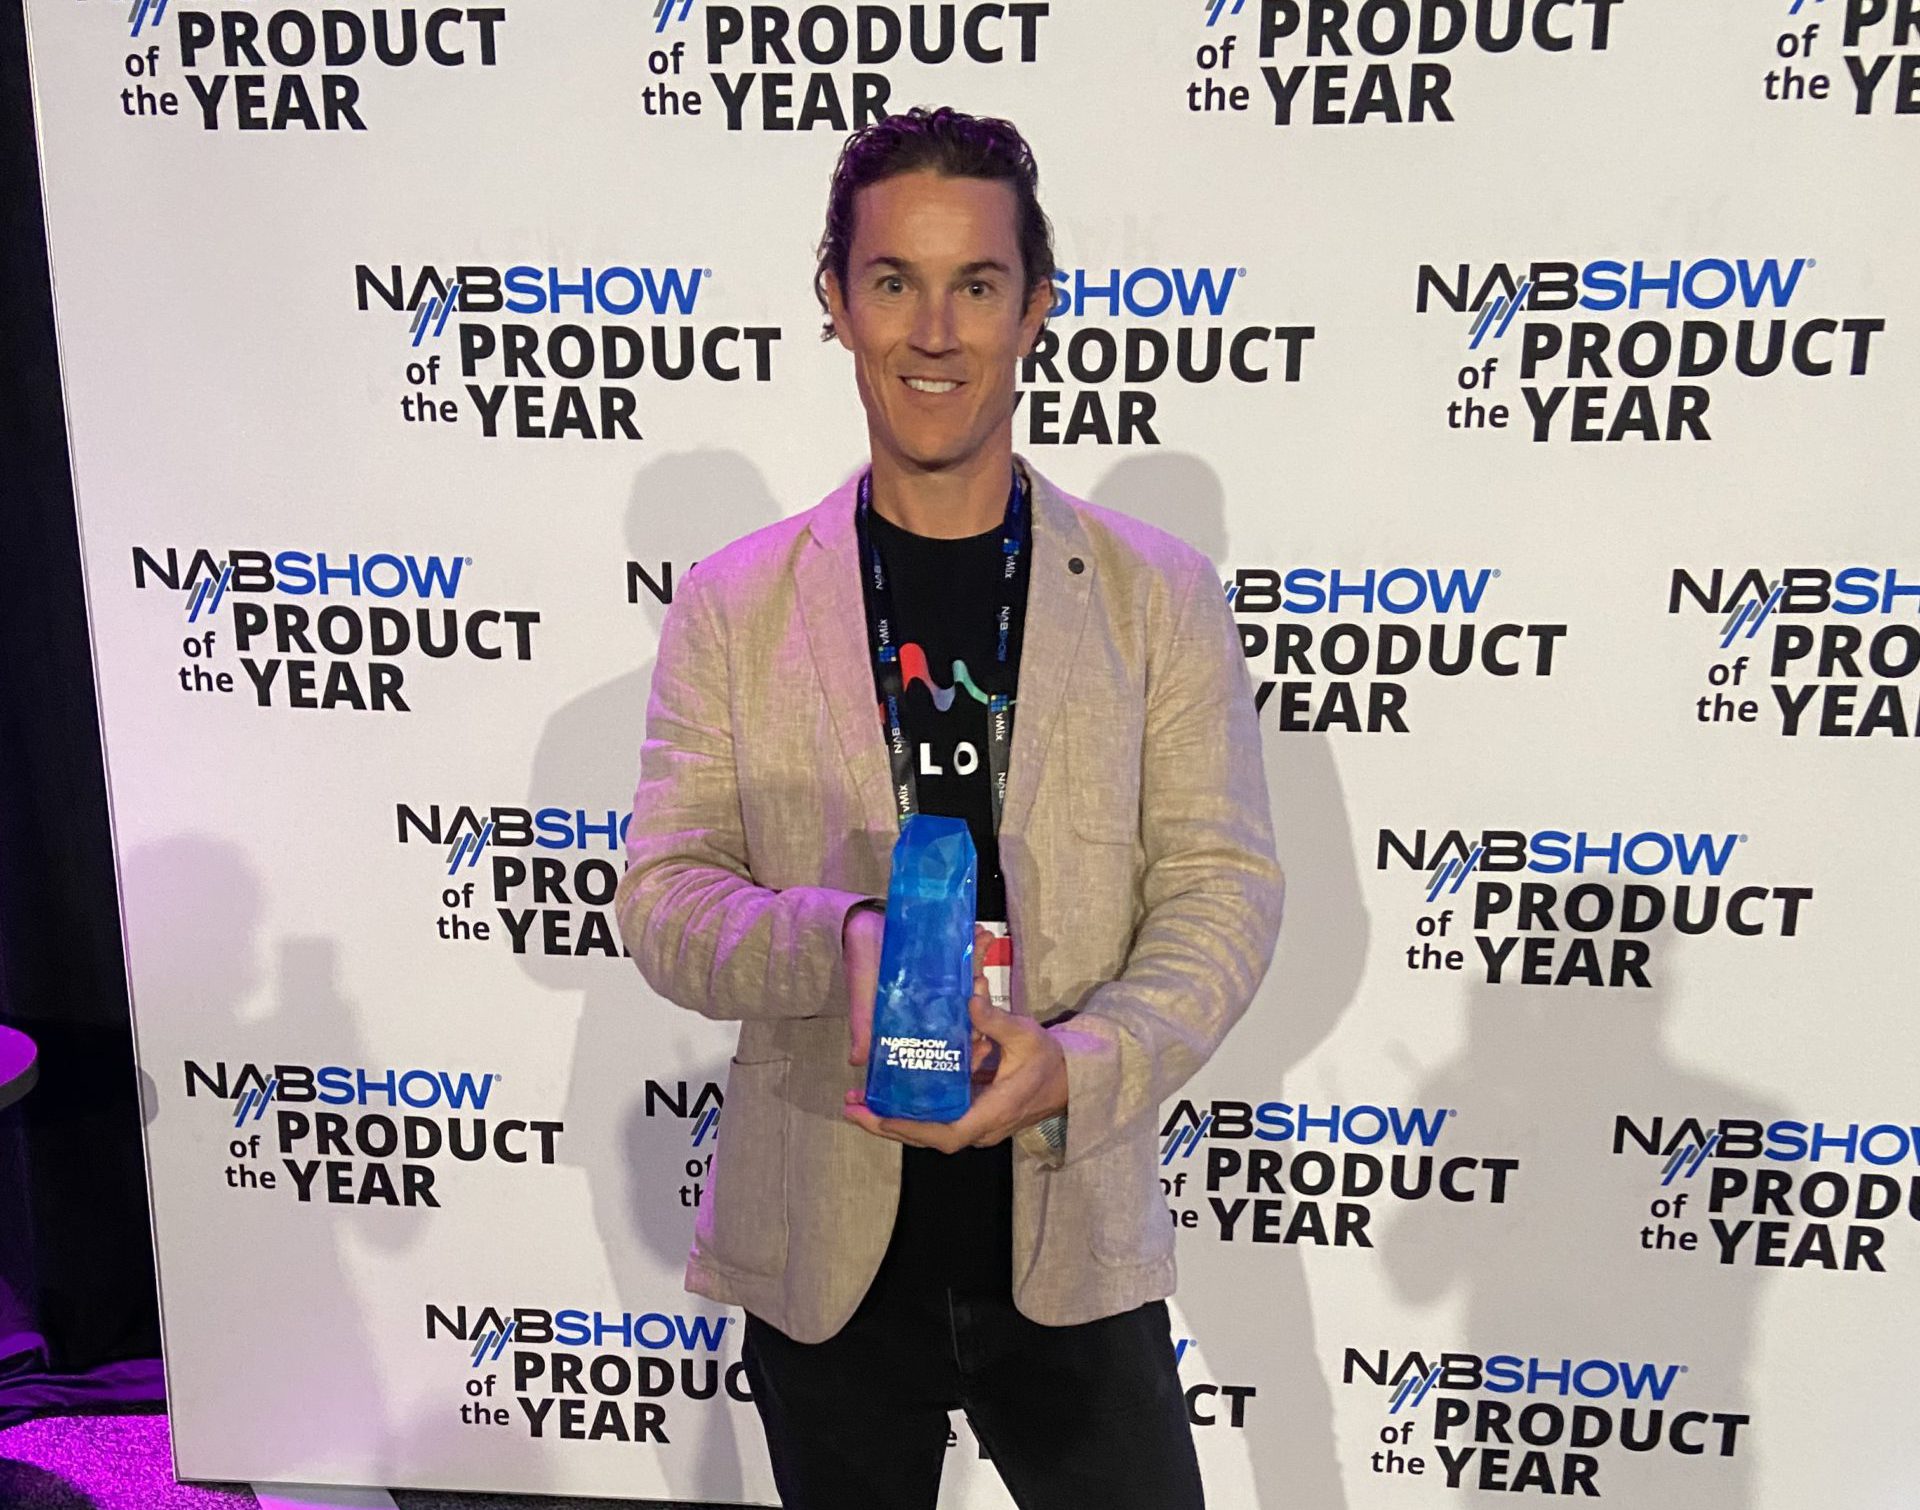 Melodie founder Evan Buist with NAB "Product of the Year" Award